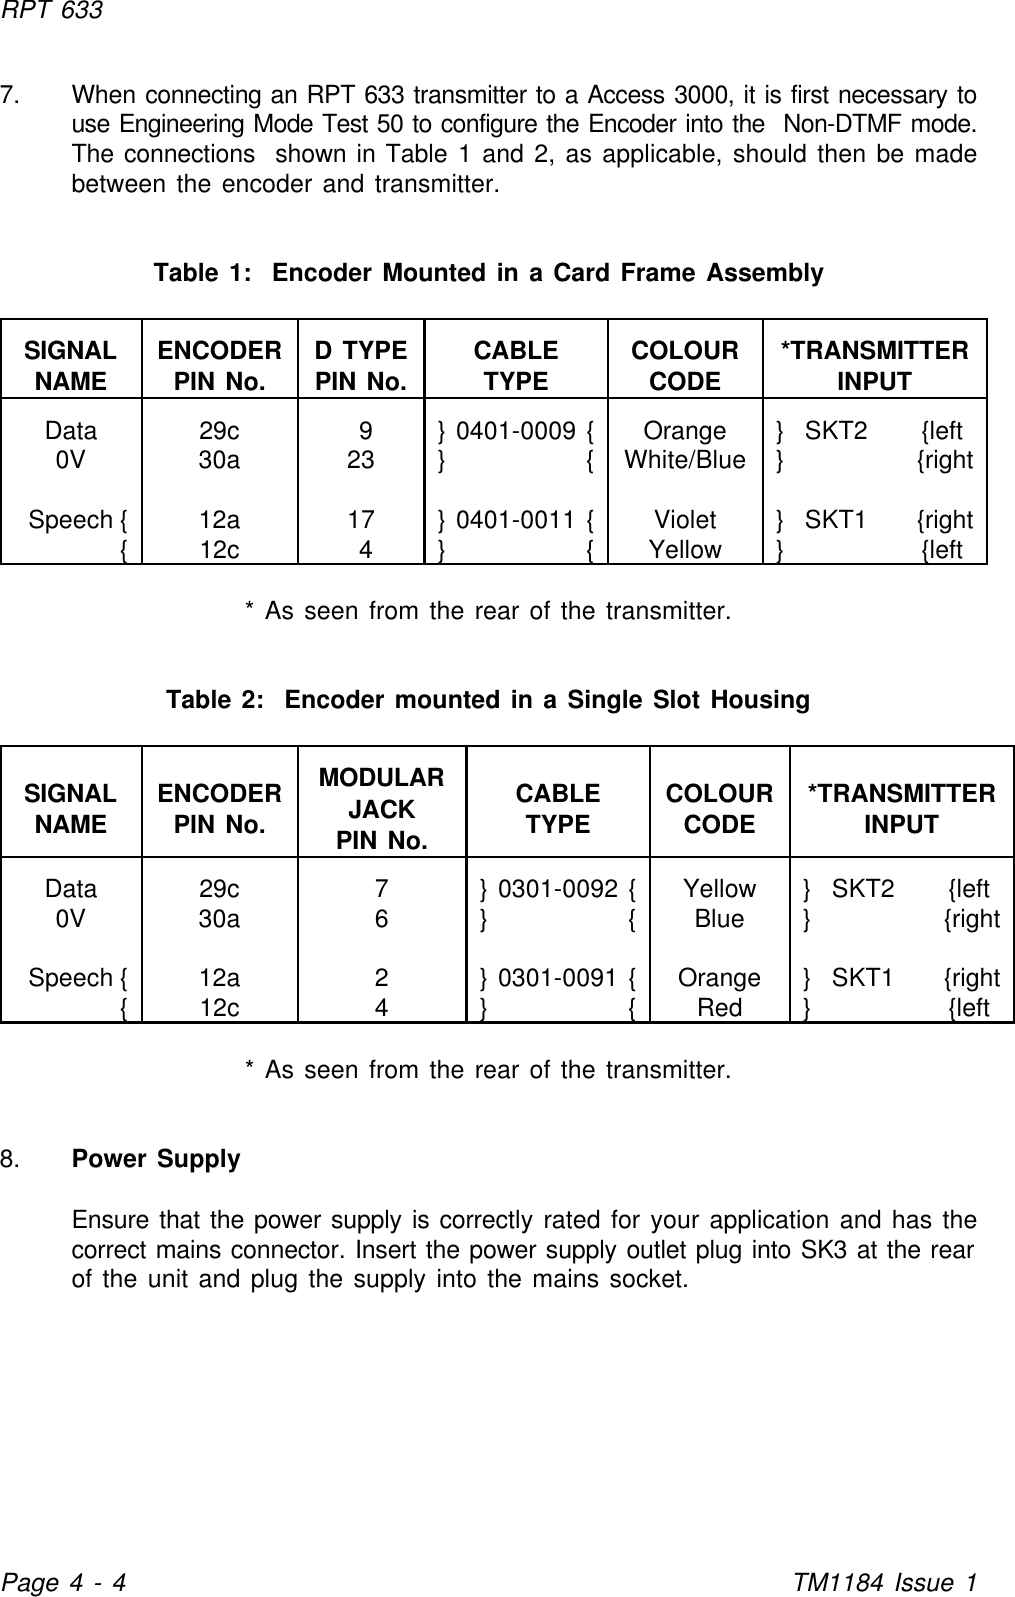 RPT 633Page 4 - 4TM1184 Issue 17. When connecting an RPT 633 transmitter to a Access 3000, it is first necessary touse Engineering Mode Test 50 to configure the Encoder into the  Non-DTMF mode.The connections  shown in Table 1 and 2, as applicable, should then be madebetween the encoder and transmitter.Table 1:  Encoder Mounted in a Card Frame AssemblySIGNAL ENCODER D TYPE CABLE COLOUR *TRANSMITTERNAME PIN No. PIN No. TYPE CODE INPUTData 29c  9 }0401-0009 {Orange }  SKT2 {left 0V 30a 23 } { White/Blue }{rightSpeech {12a 17 }0401-0011 {Violet }  SKT1 {right{12c  4 } { Yellow }{left * As seen from the rear of the transmitter.Table 2:  Encoder mounted in a Single Slot HousingSIGNAL ENCODER CABLE COLOUR *TRANSMITTERNAME PIN No. TYPE CODE INPUTMODULARJACKPIN No.Data 29c 7}0301-0092 {Yellow }  SKT2 {left 0V 30a 6 } { Blue }{rightSpeech {12a 2 }0301-0091 {Orange }  SKT1 {right{12c 4} { Red }{left * As seen from the rear of the transmitter.8. Power SupplyEnsure that the power supply is correctly rated for your application and has thecorrect mains connector. Insert the power supply outlet plug into SK3 at the rearof the unit and plug the supply into the mains socket.